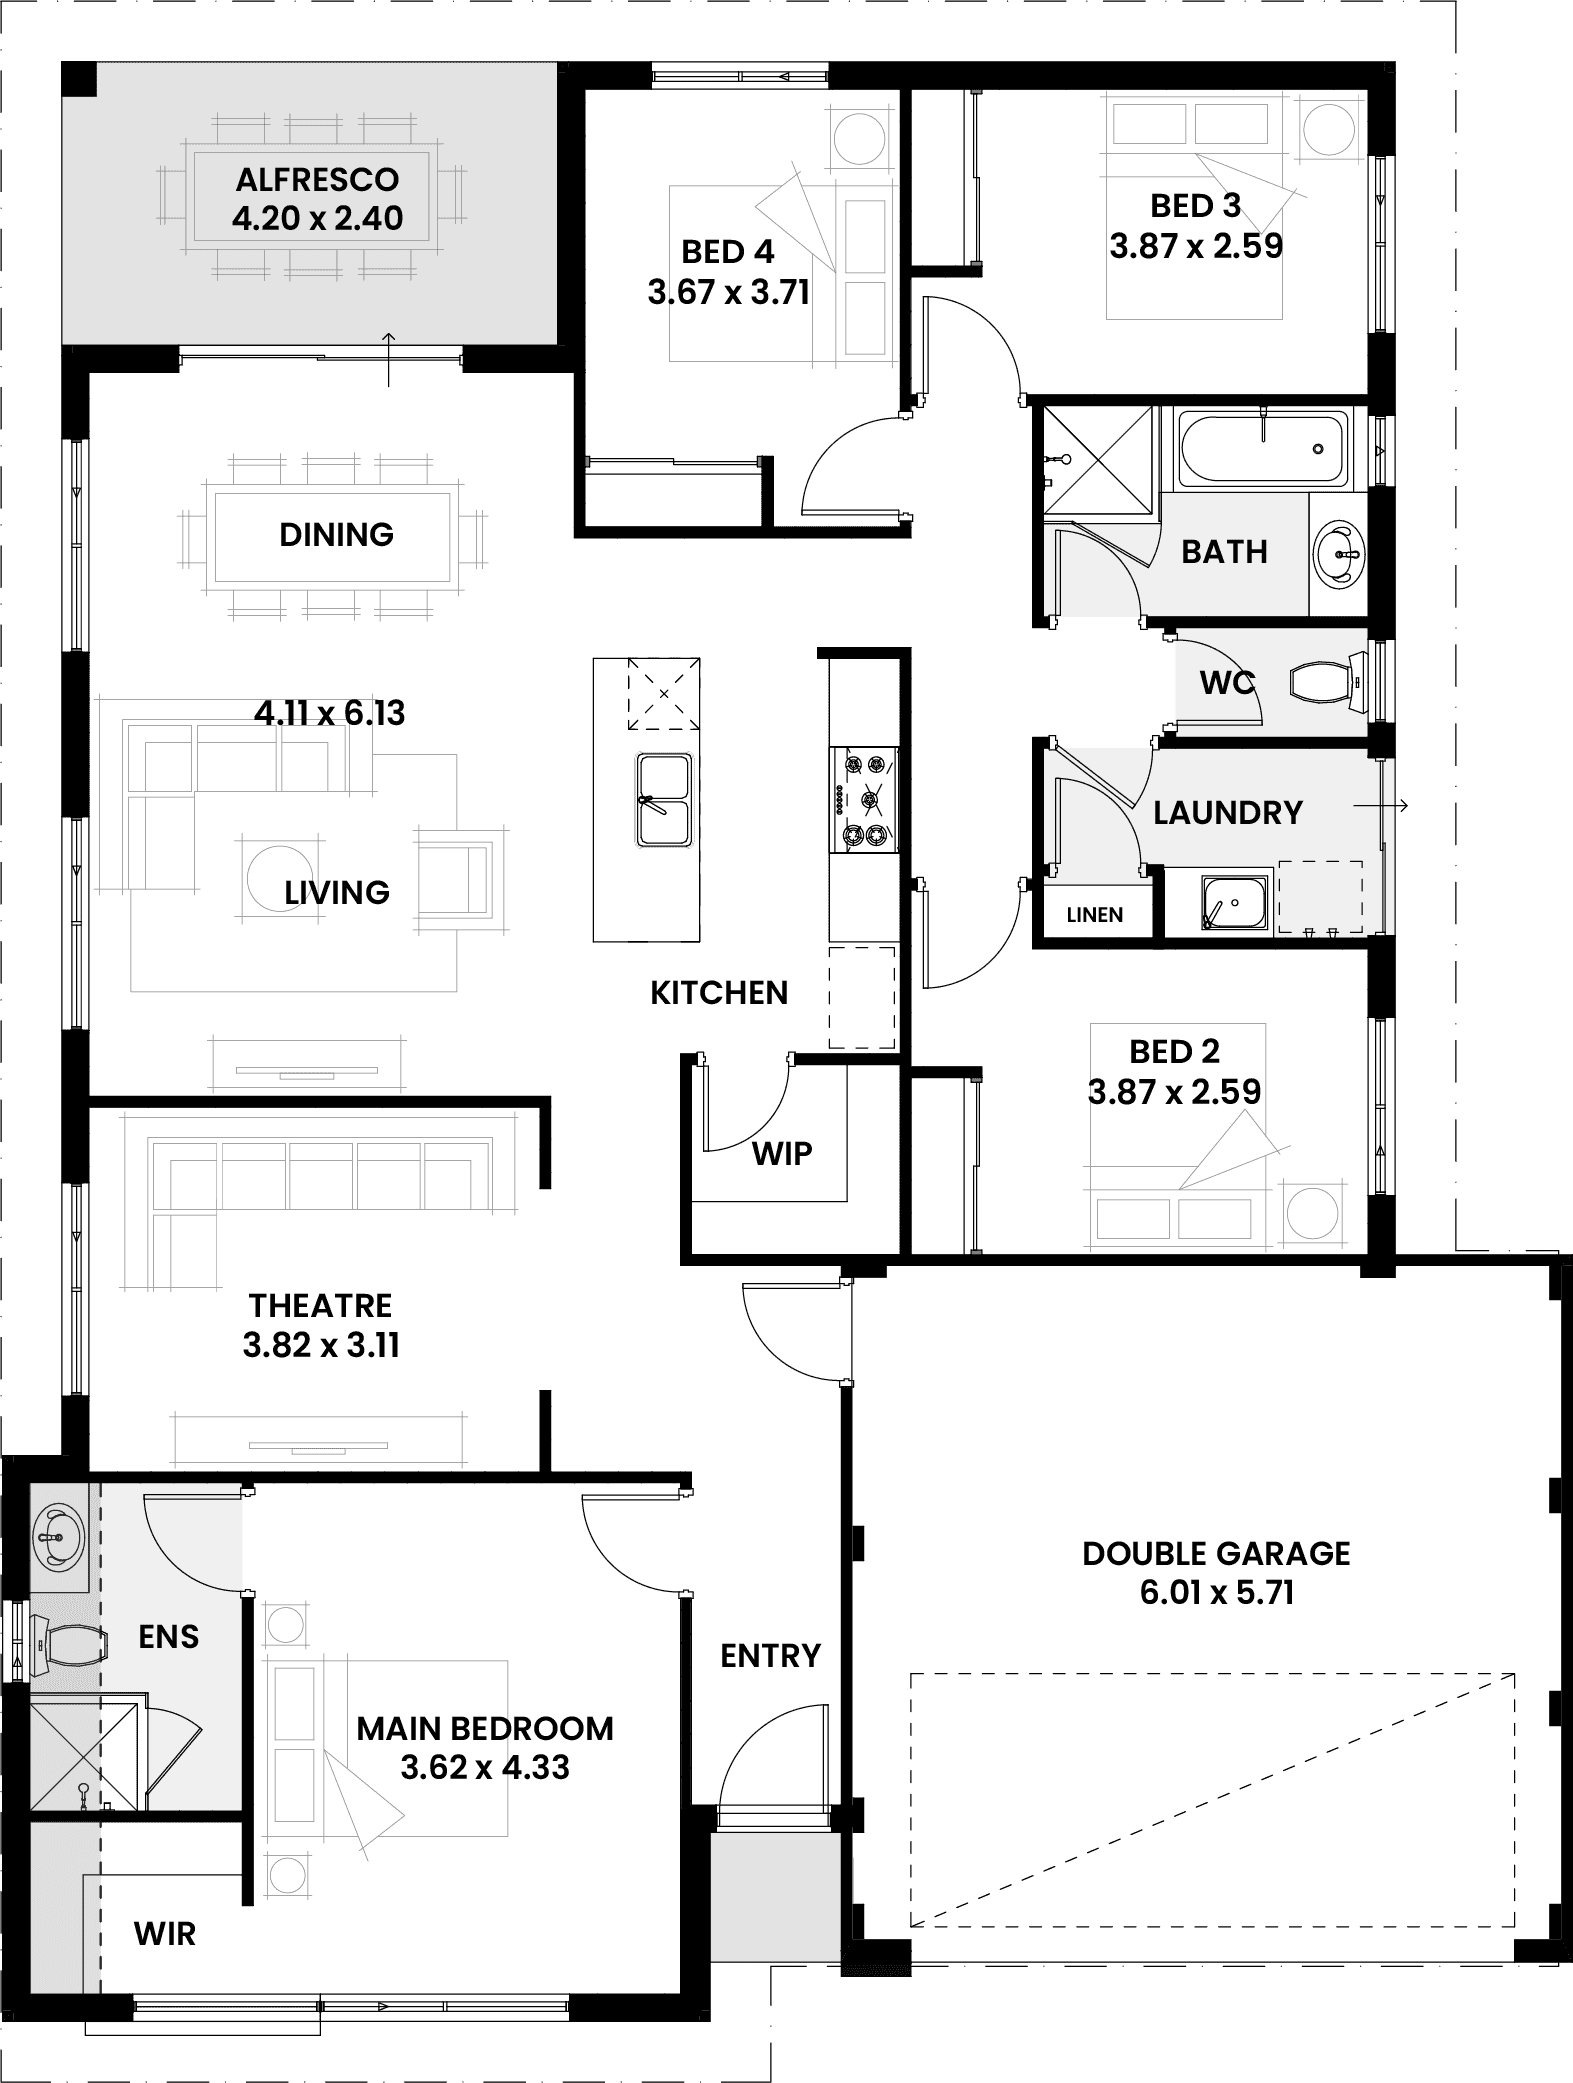 Floorplan for The Hazel, a Move Homes new home design perfect for first time buyers and new builders in Perth